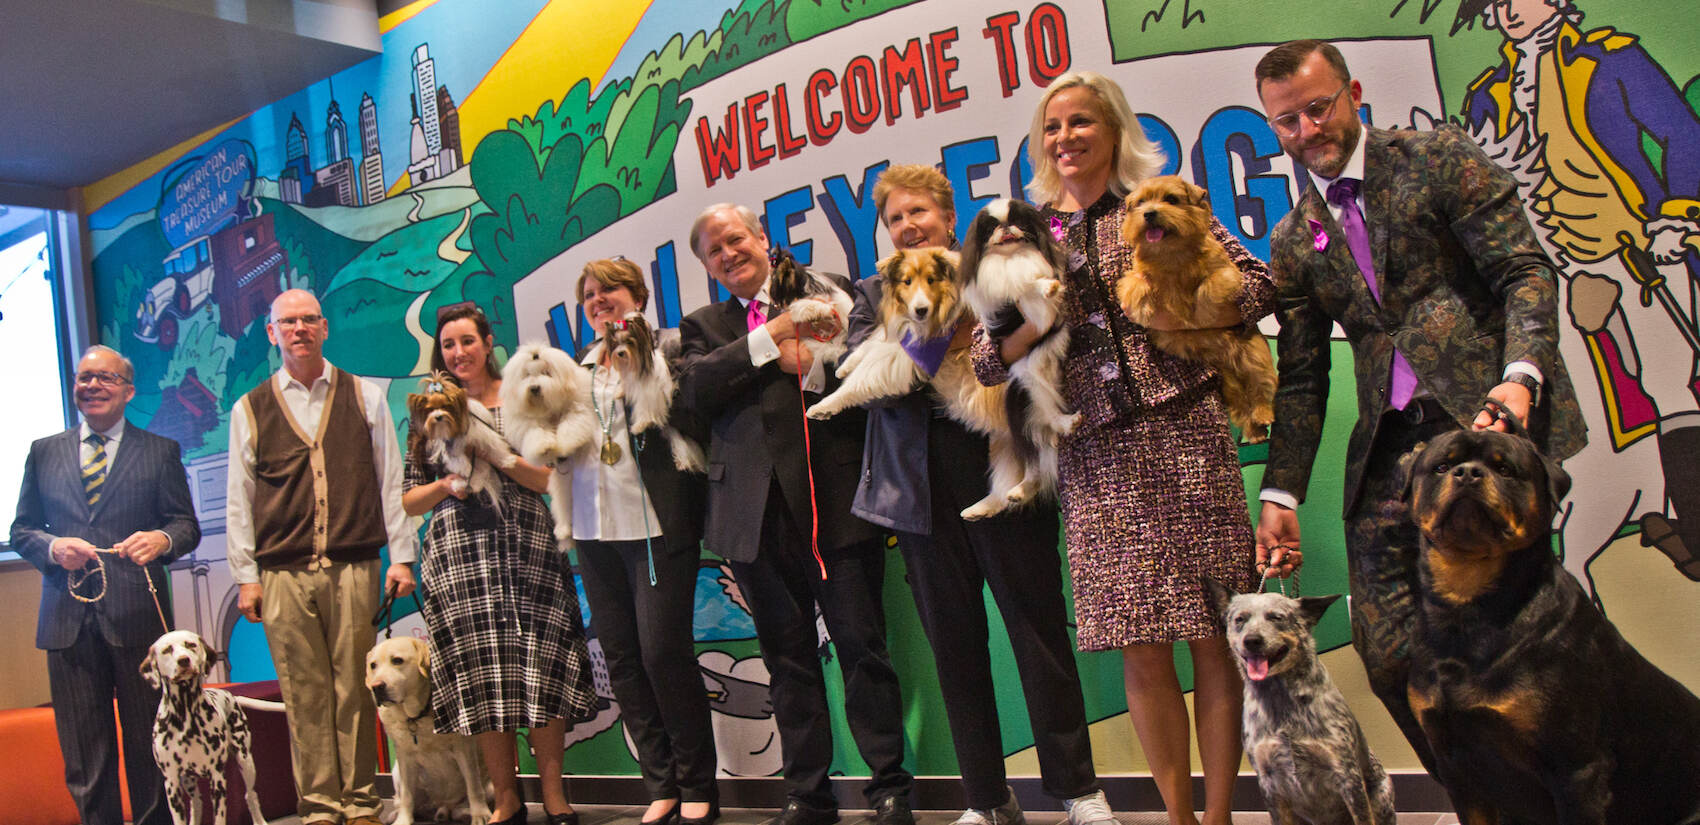 Champions and champion-hopefuls helped to kick off the 20th anniversary of the National Dog Show in Audubon, Pa., on November 16, 2021. (Kimberly Paynter/WHYY)